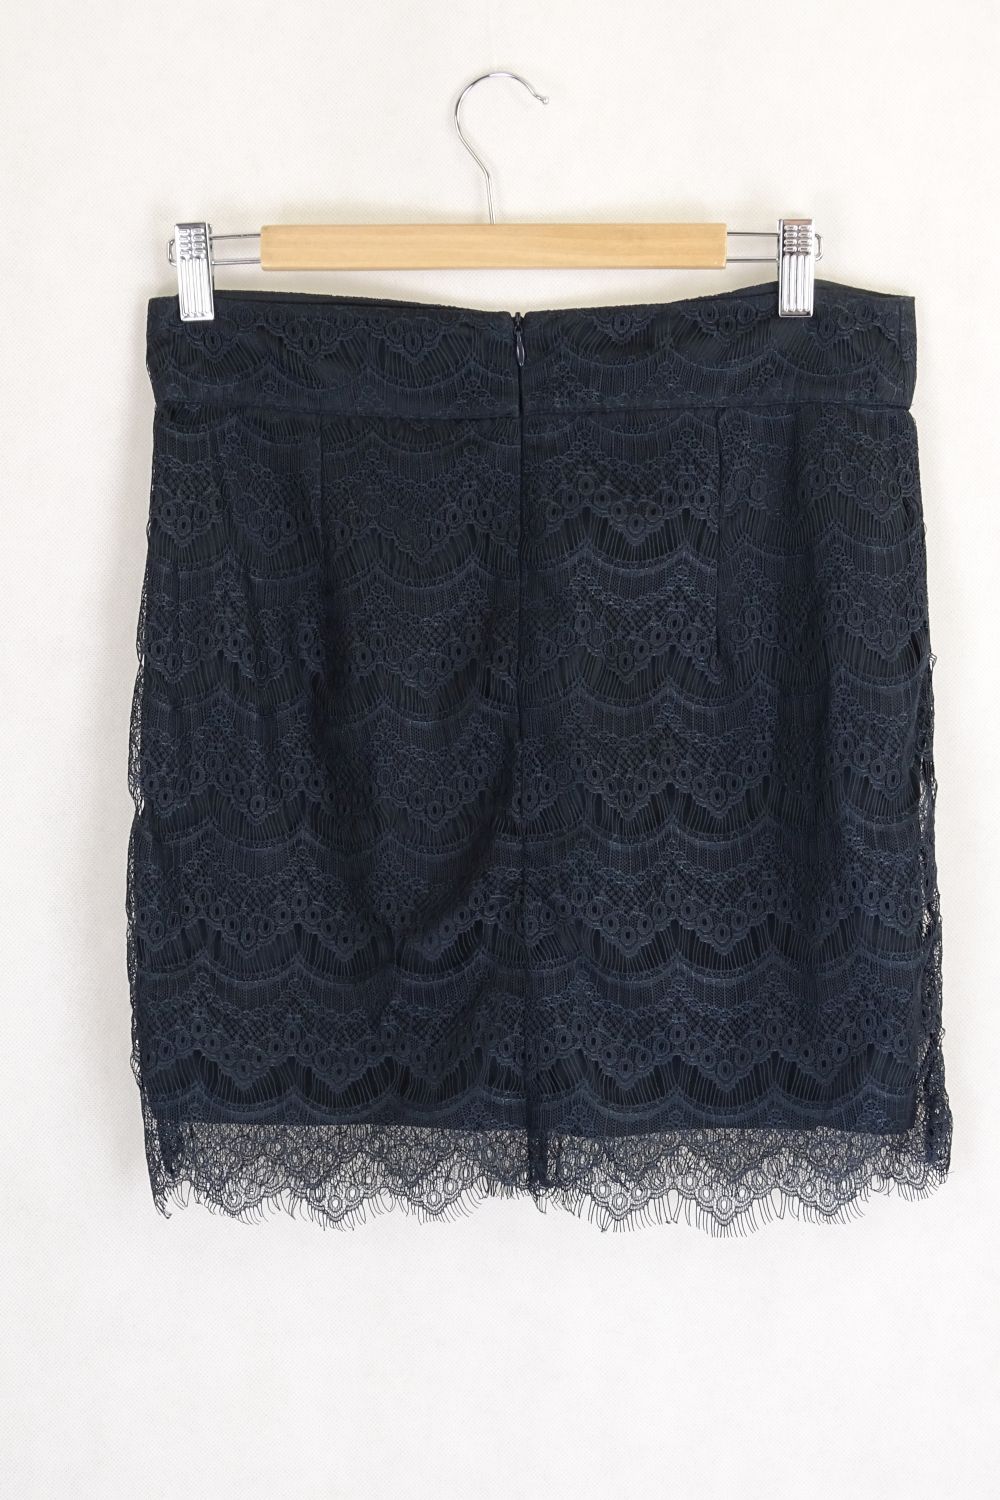 Maurie and Eve Lace Skirt 10